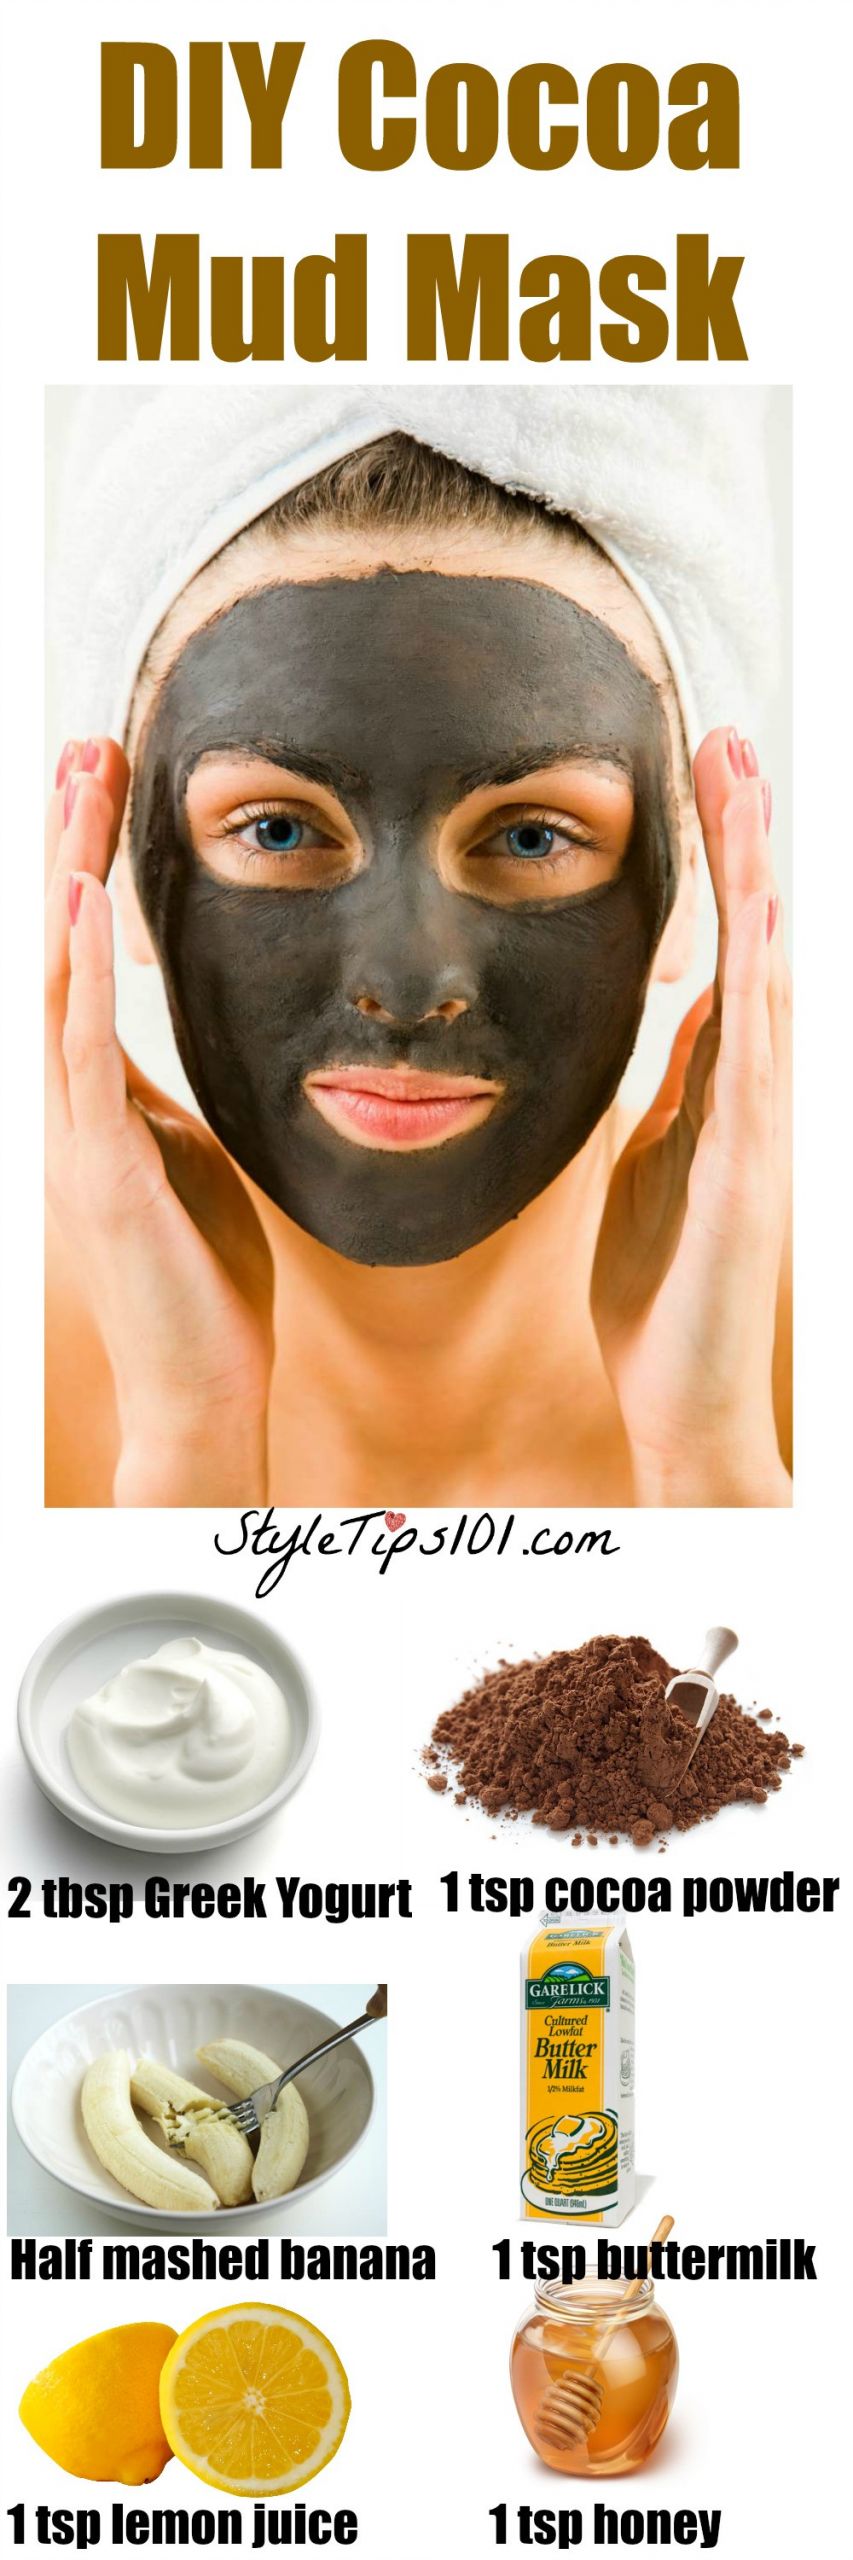 DIY Facial Mask
 DIY Mud Mask For Acne Prone and Oily Skin